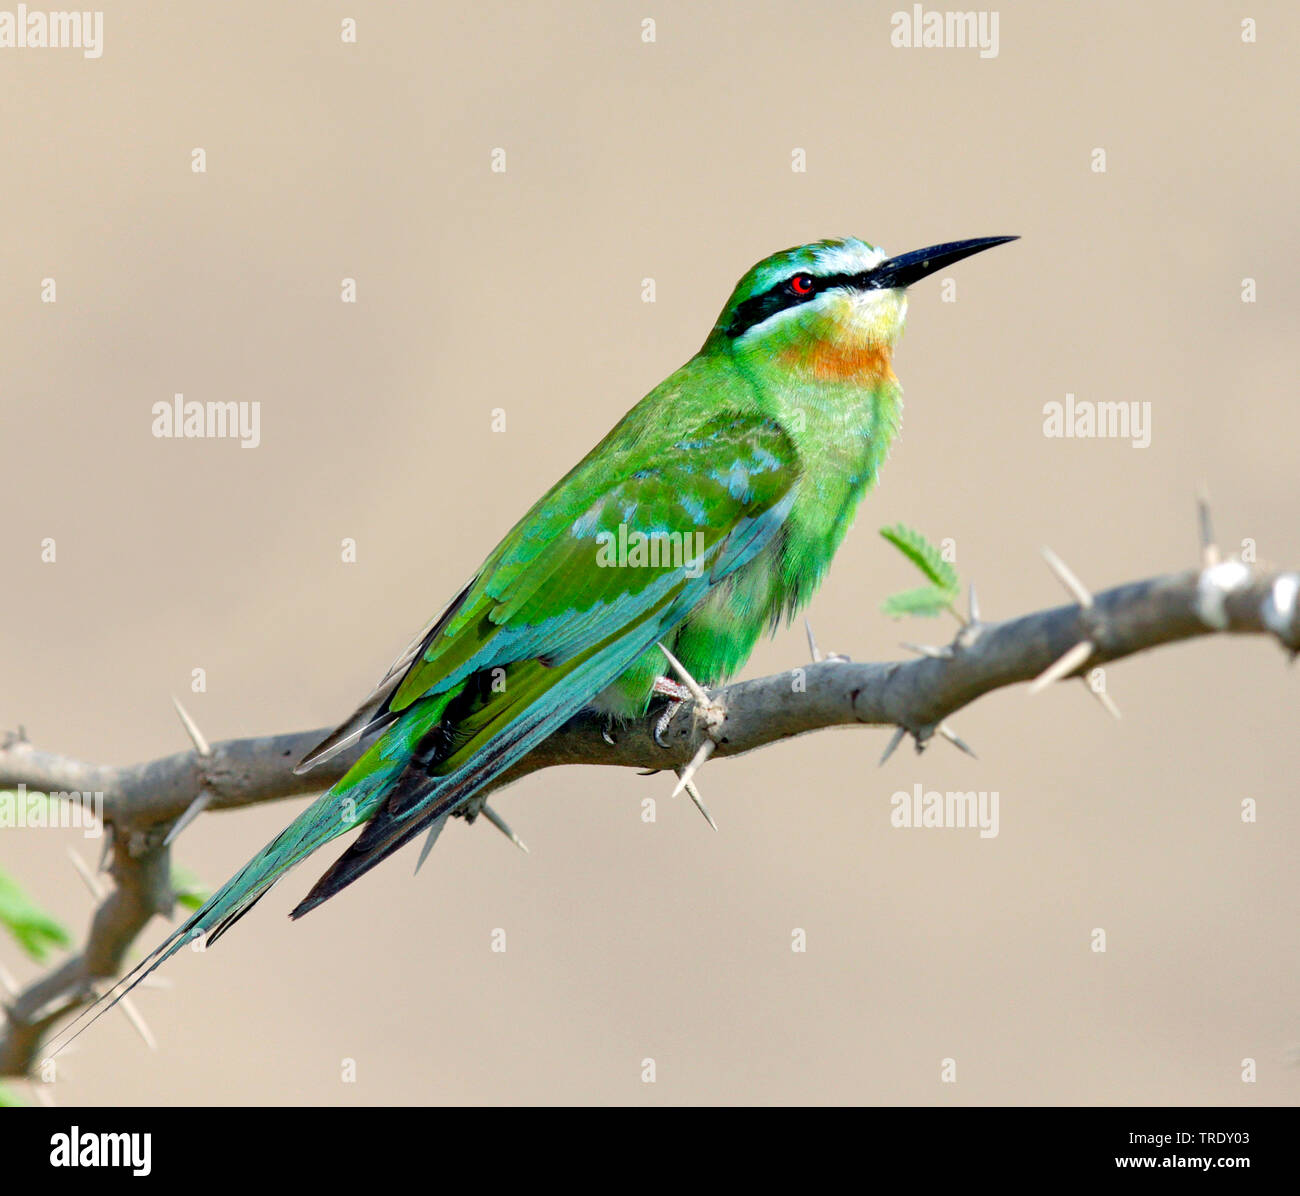 Blue-cheeked bee-eater (Merops persicus), assis sur une branche, Oman Banque D'Images